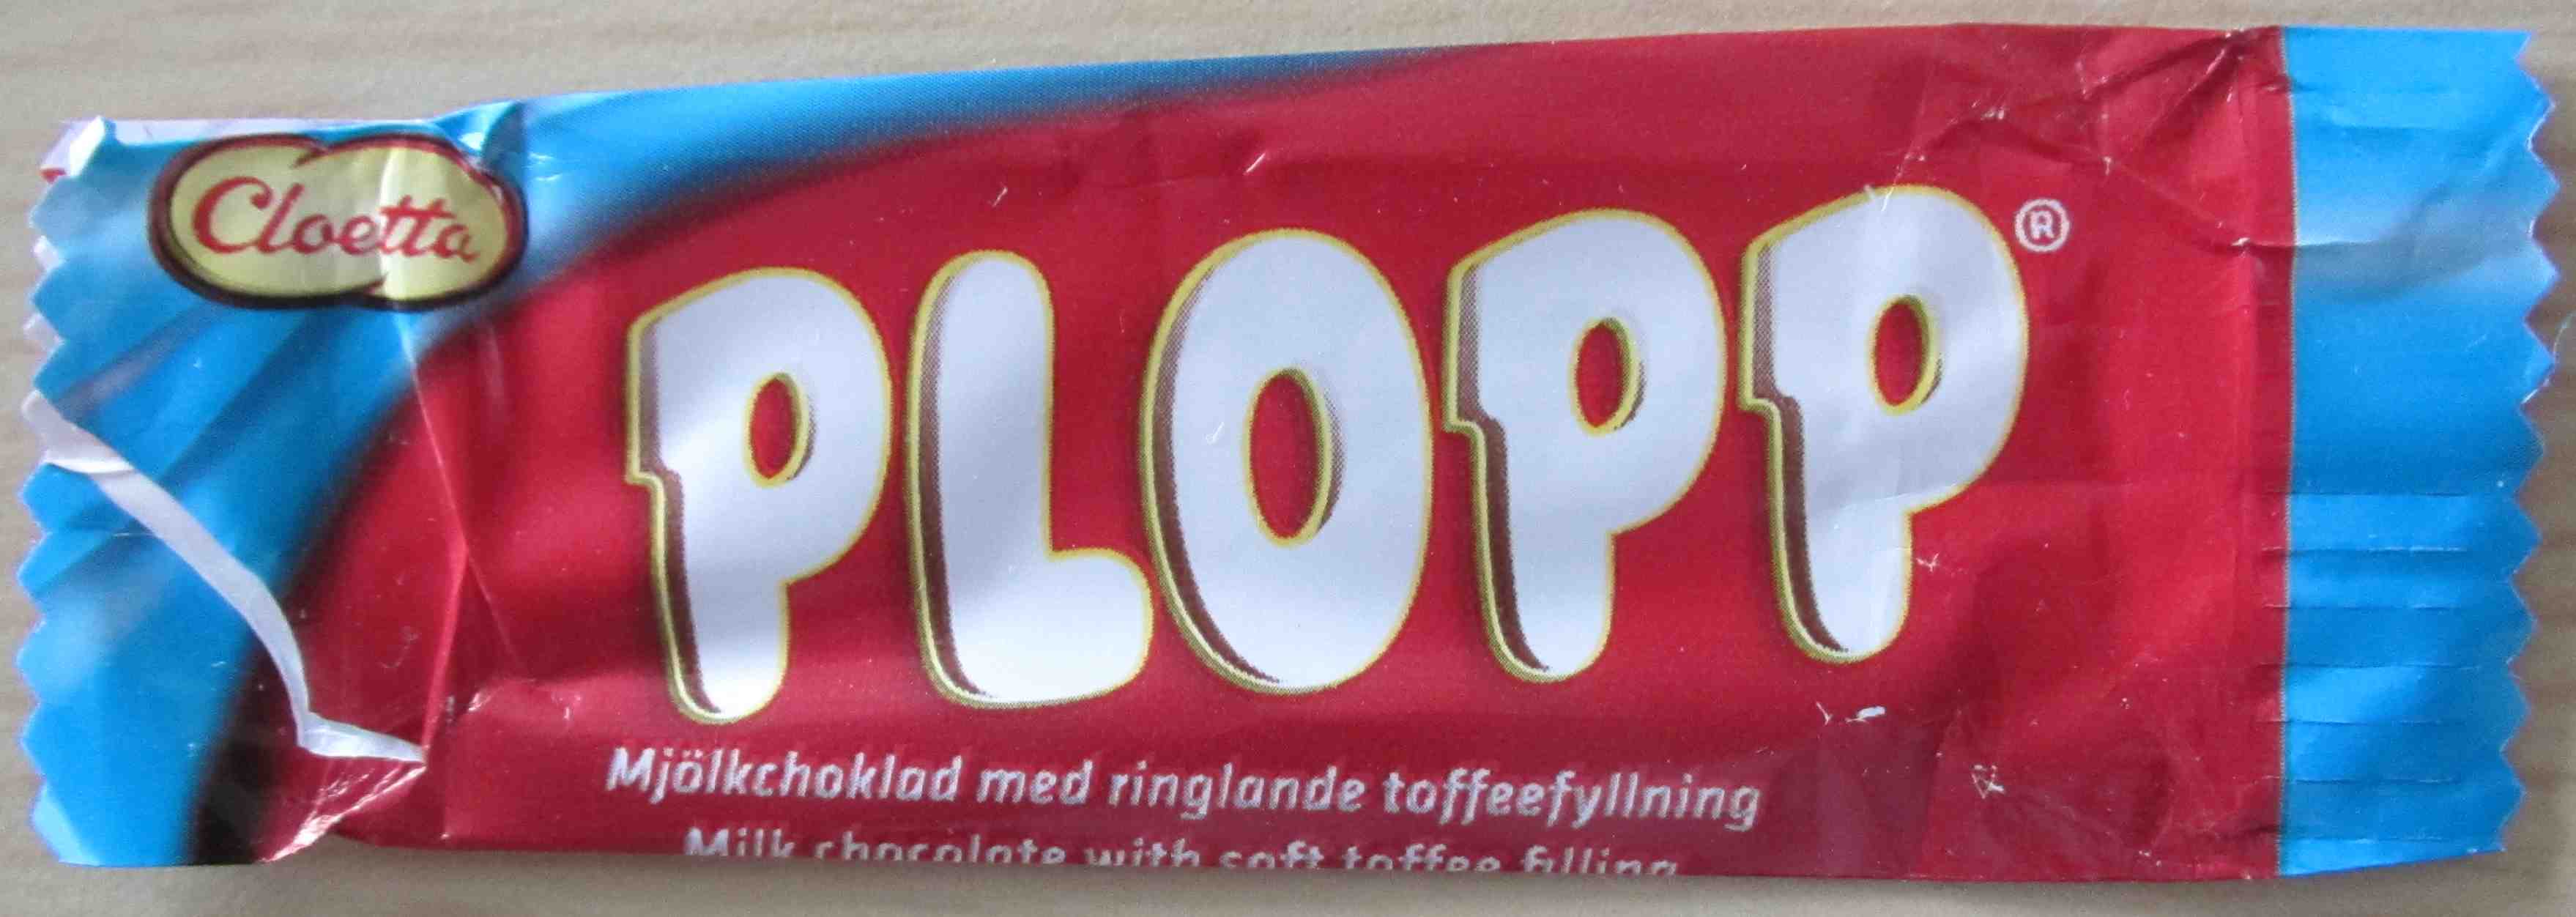 wrapper of the Plopp candy bar I received from Rebecca Rikner